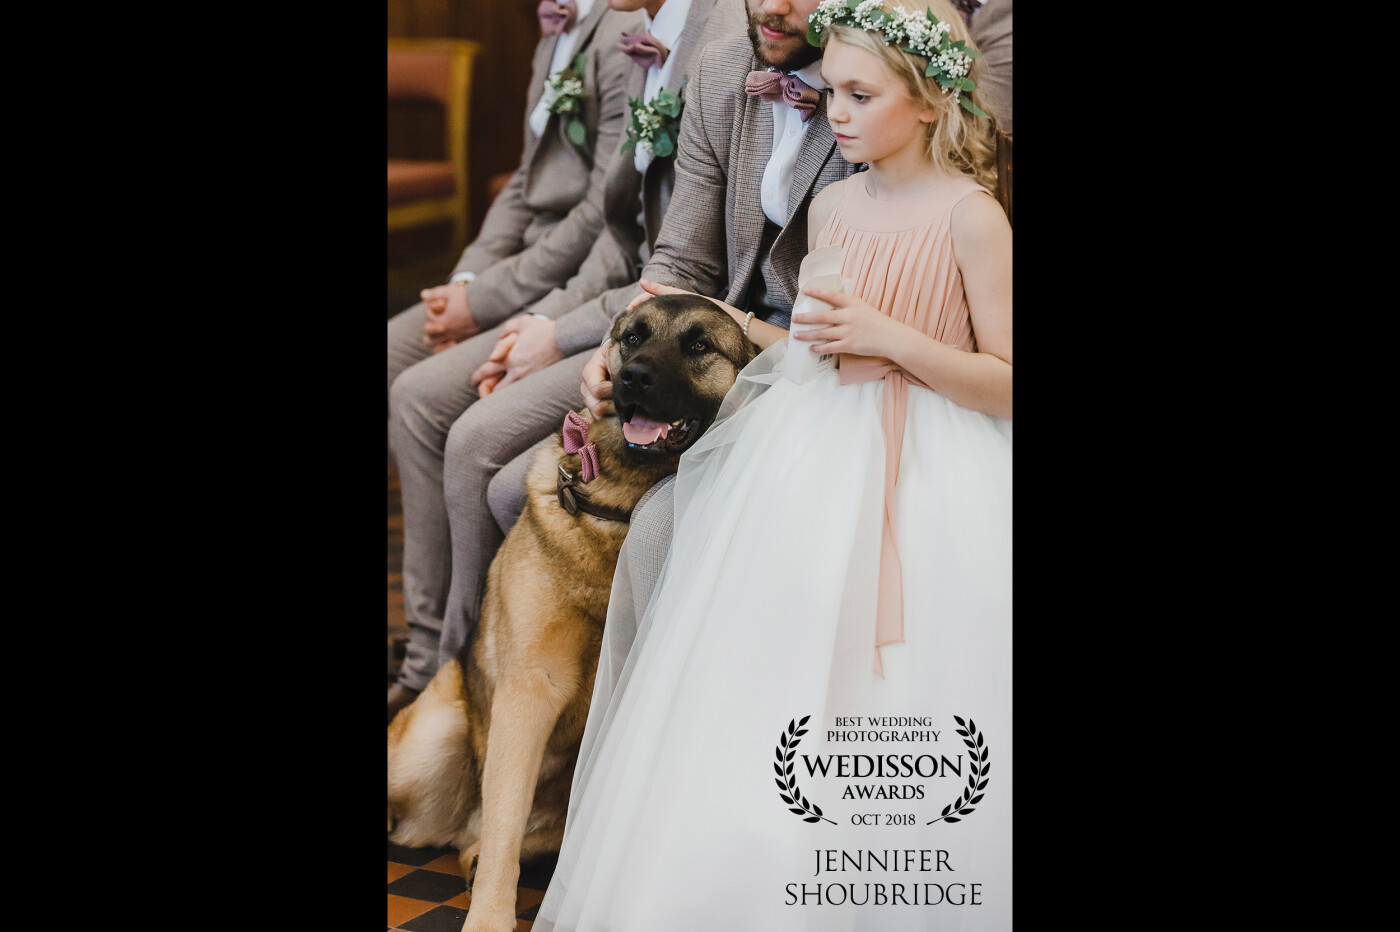 This photo was taken in the Church as Georgia and Louis were getting married. Monty (the dog) had been a little lively, wanting to be by Louis's side, and so Bella stepped across the aisle a stood next to him gently stroking his head as he sat next to the best man Tom. It seemed to calm Monty as they both watch on the proceedings, and it was a really sweet moment between the flower girl and the ring bearer.